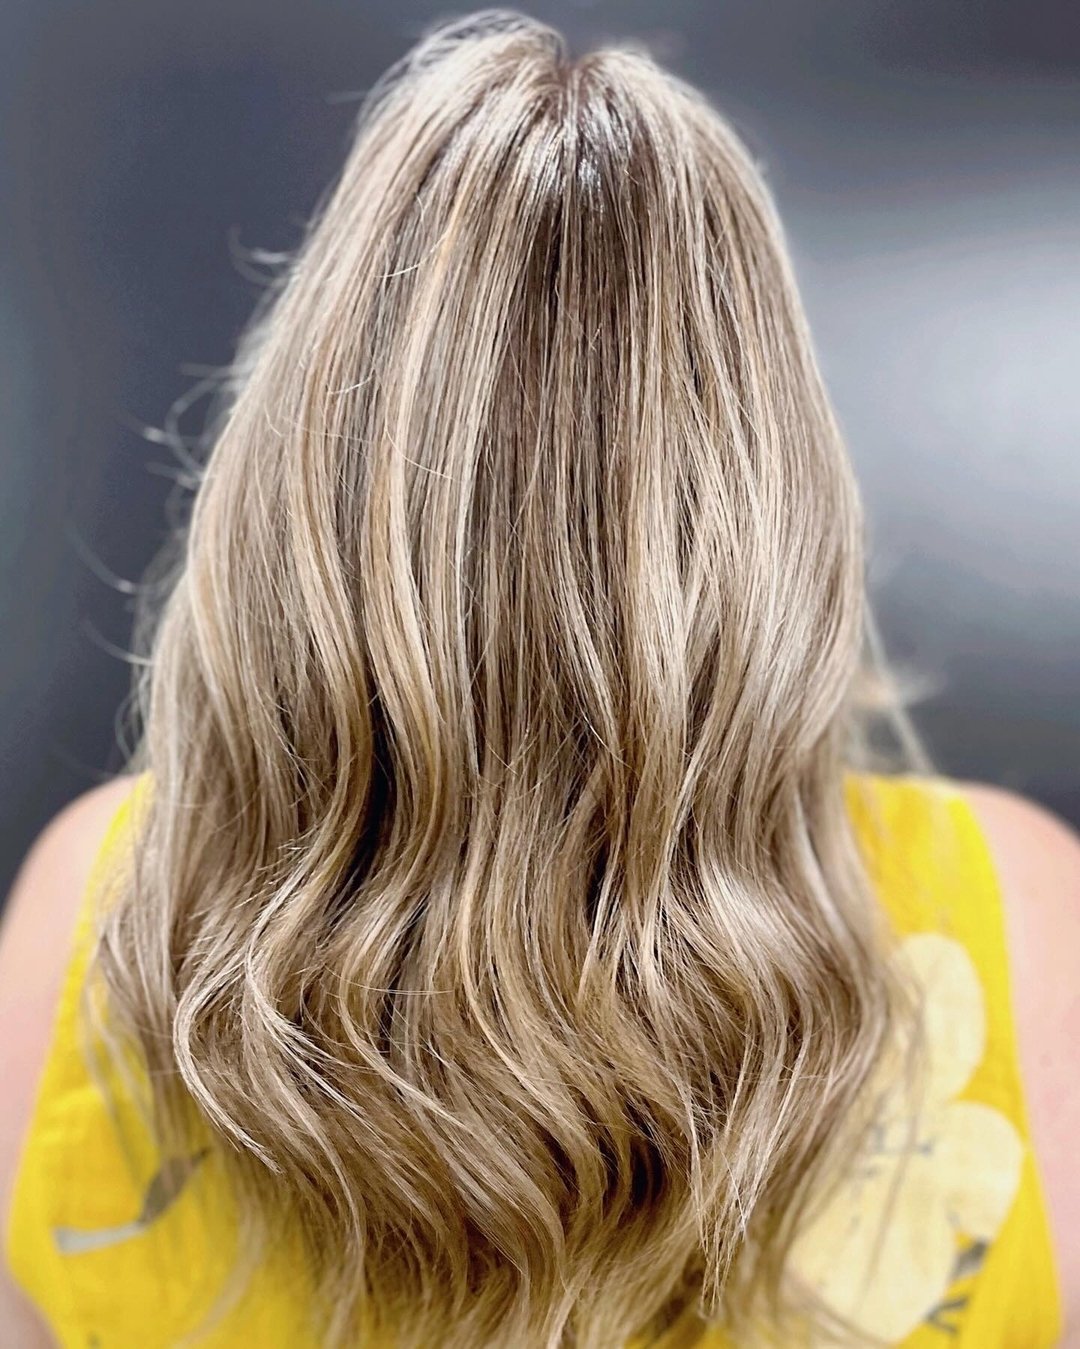 Dime Nancy&rsquo;s coastal colour for low maintenance high definition sunkissed summer forever vibes 🔅🔅🔅

#dimetime #halifaxhair #wellahair #bumbleandbumble #halifaxhairstylist